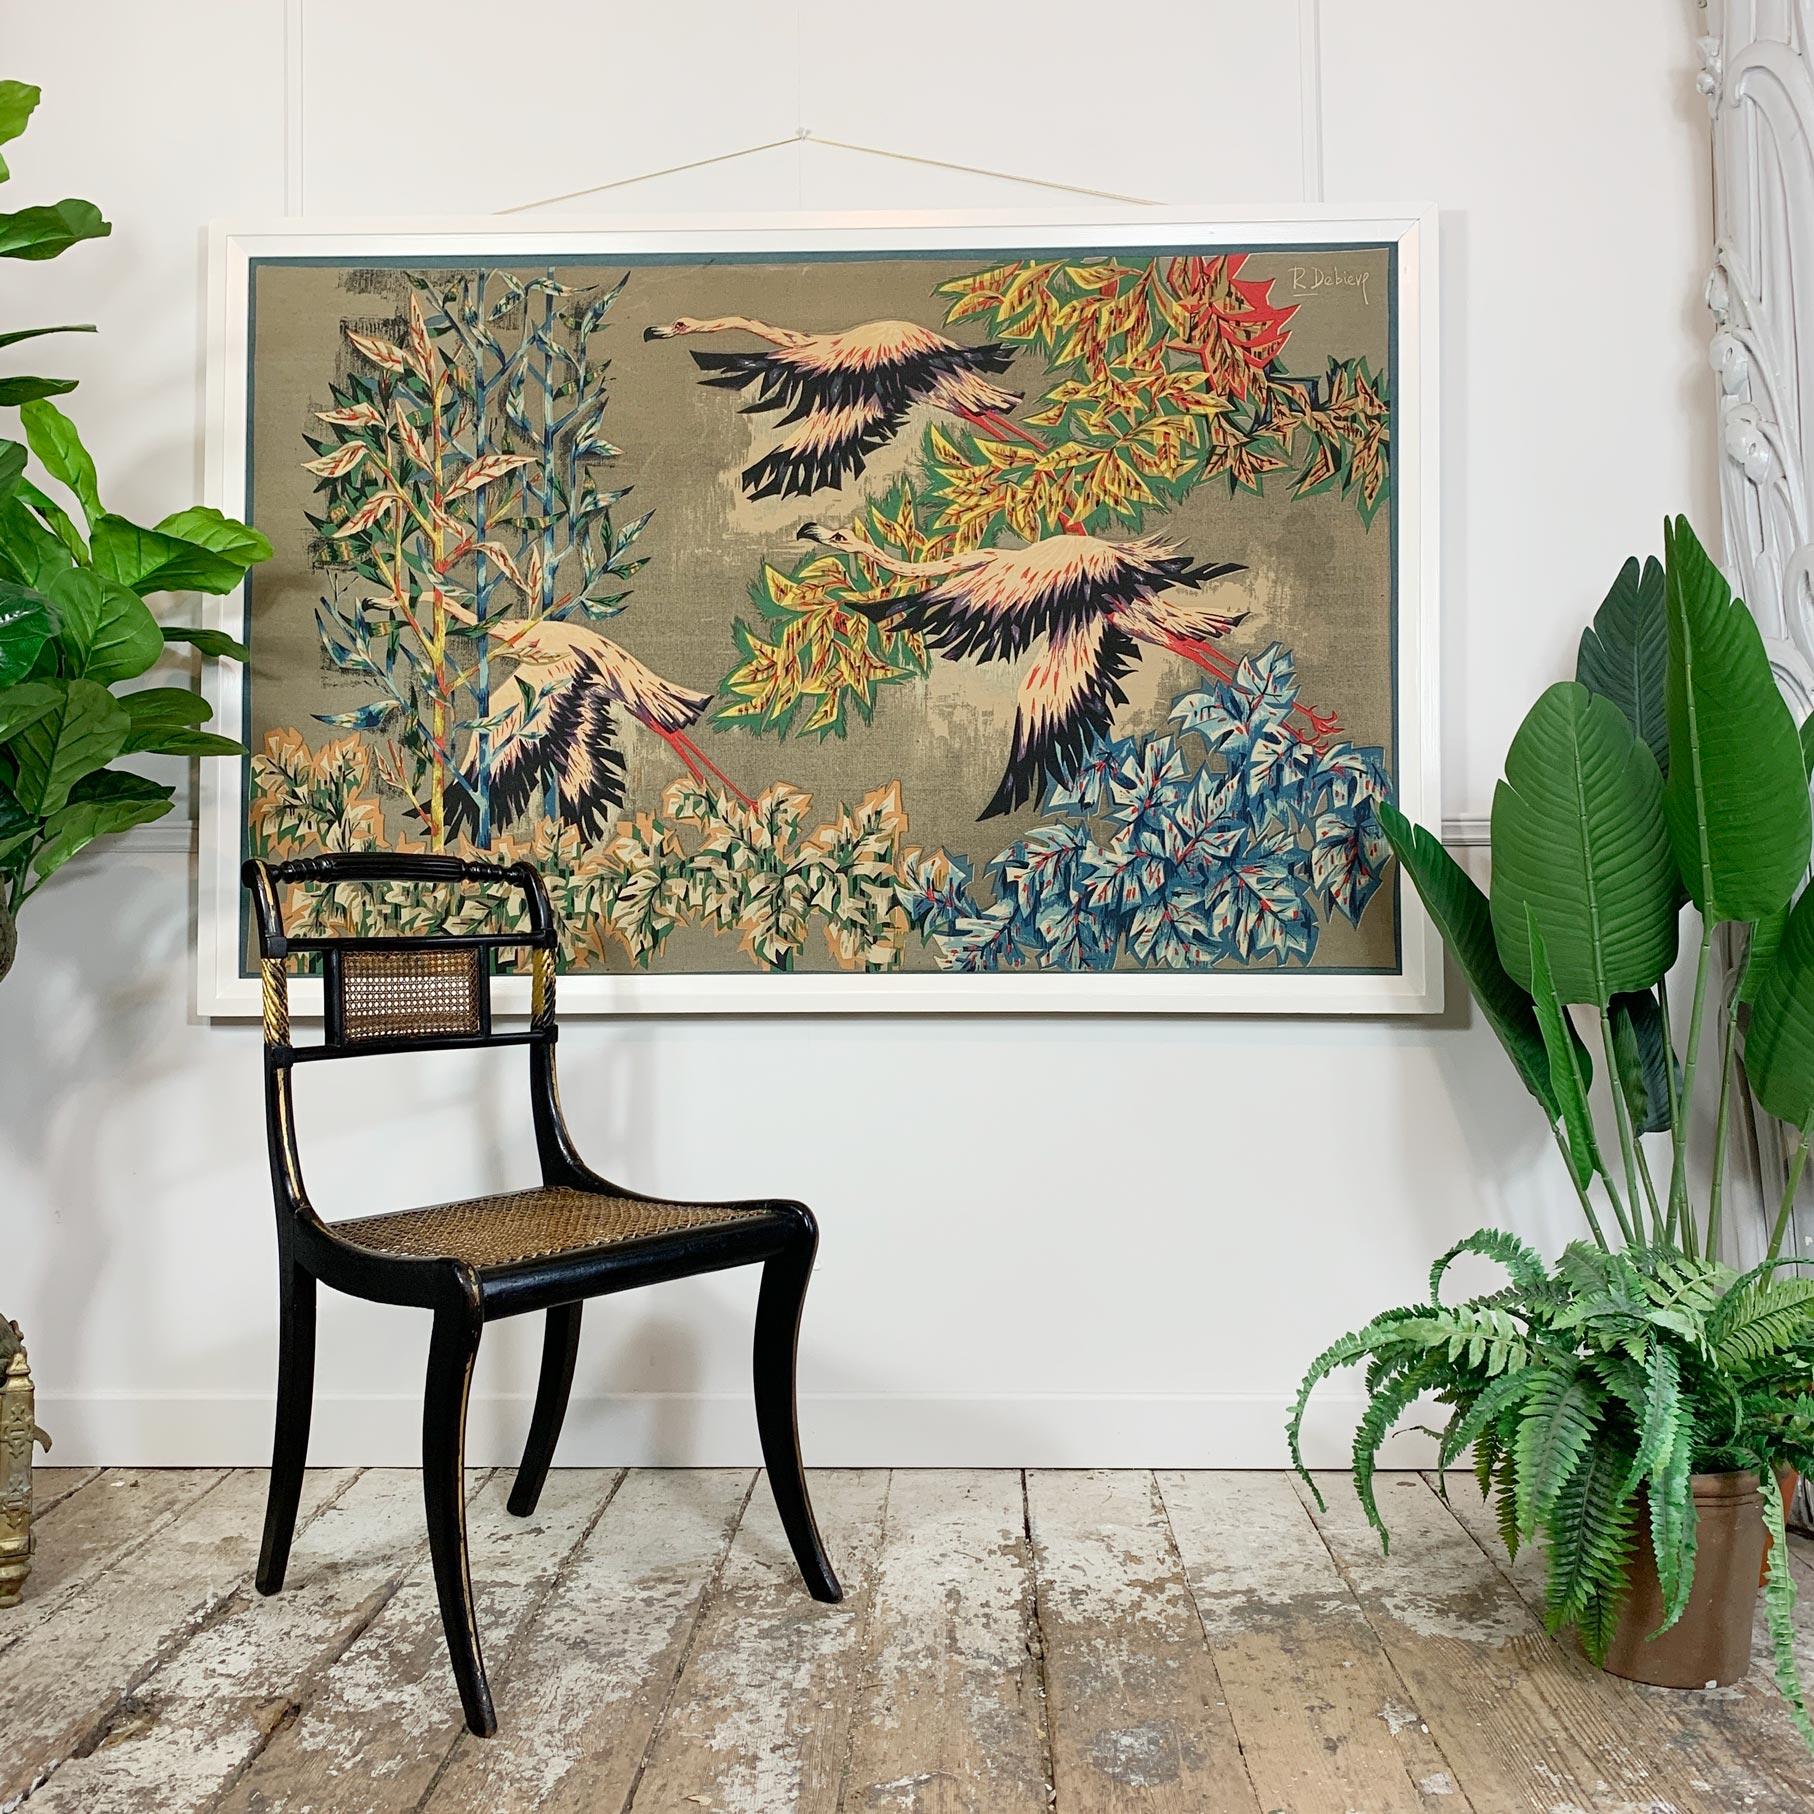 Debiève was a French artist who specialised in cubism and contemporary art work, often referred to as tapestries these pieces are actually screen prints on a variety of medium.

‘The Flight of the Flamingos’, or ‘Le vol de Flamants’ is screen